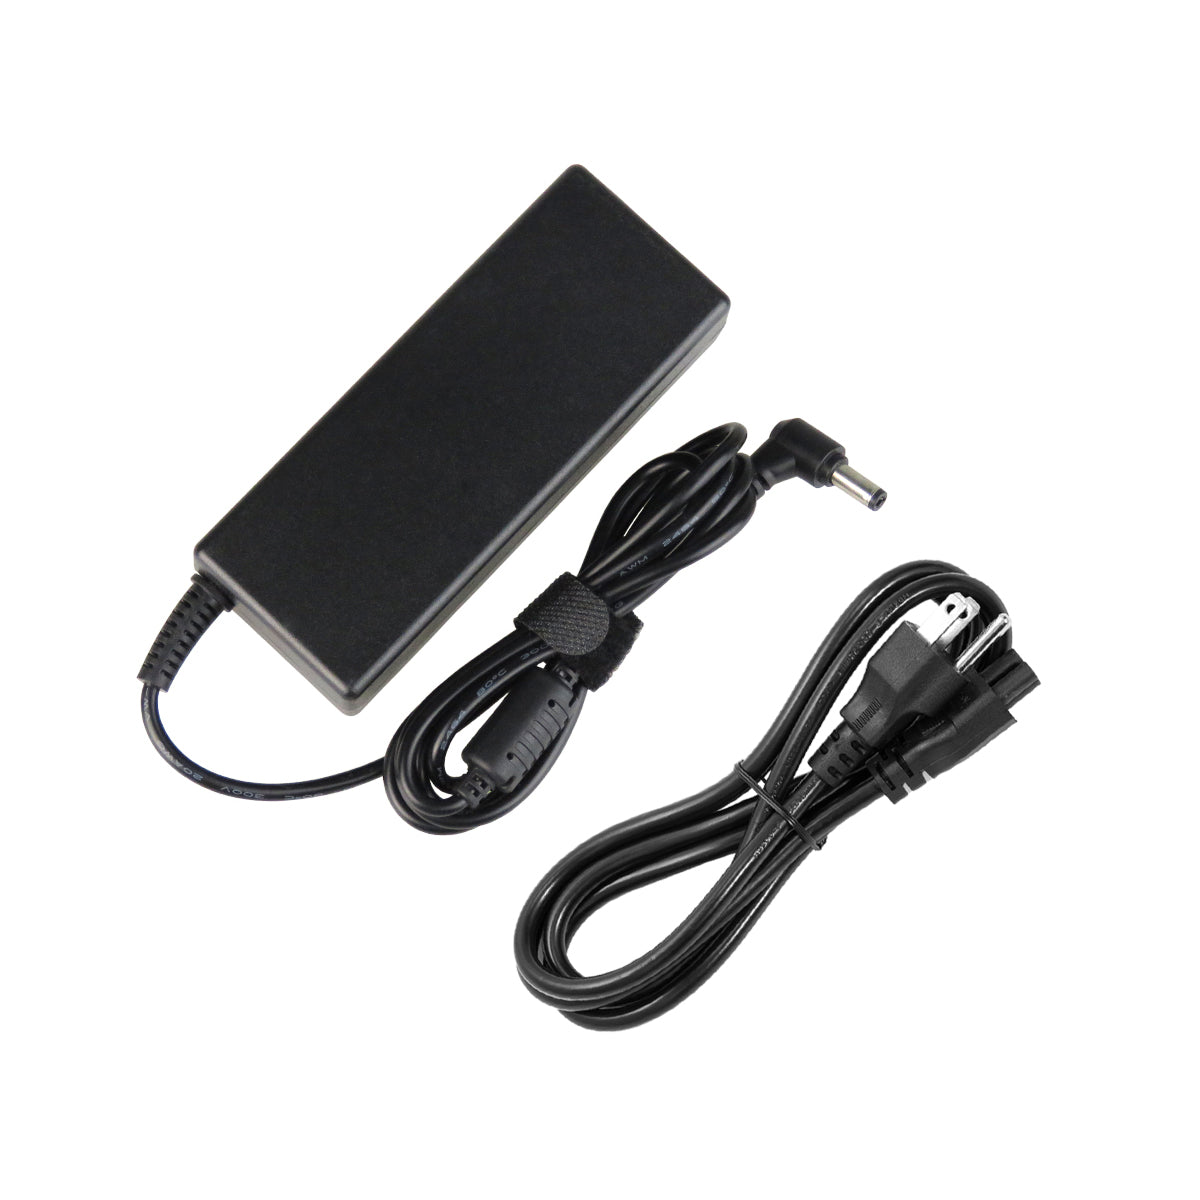 AC Adapter Charger for ASUS K45VJ Notebook.